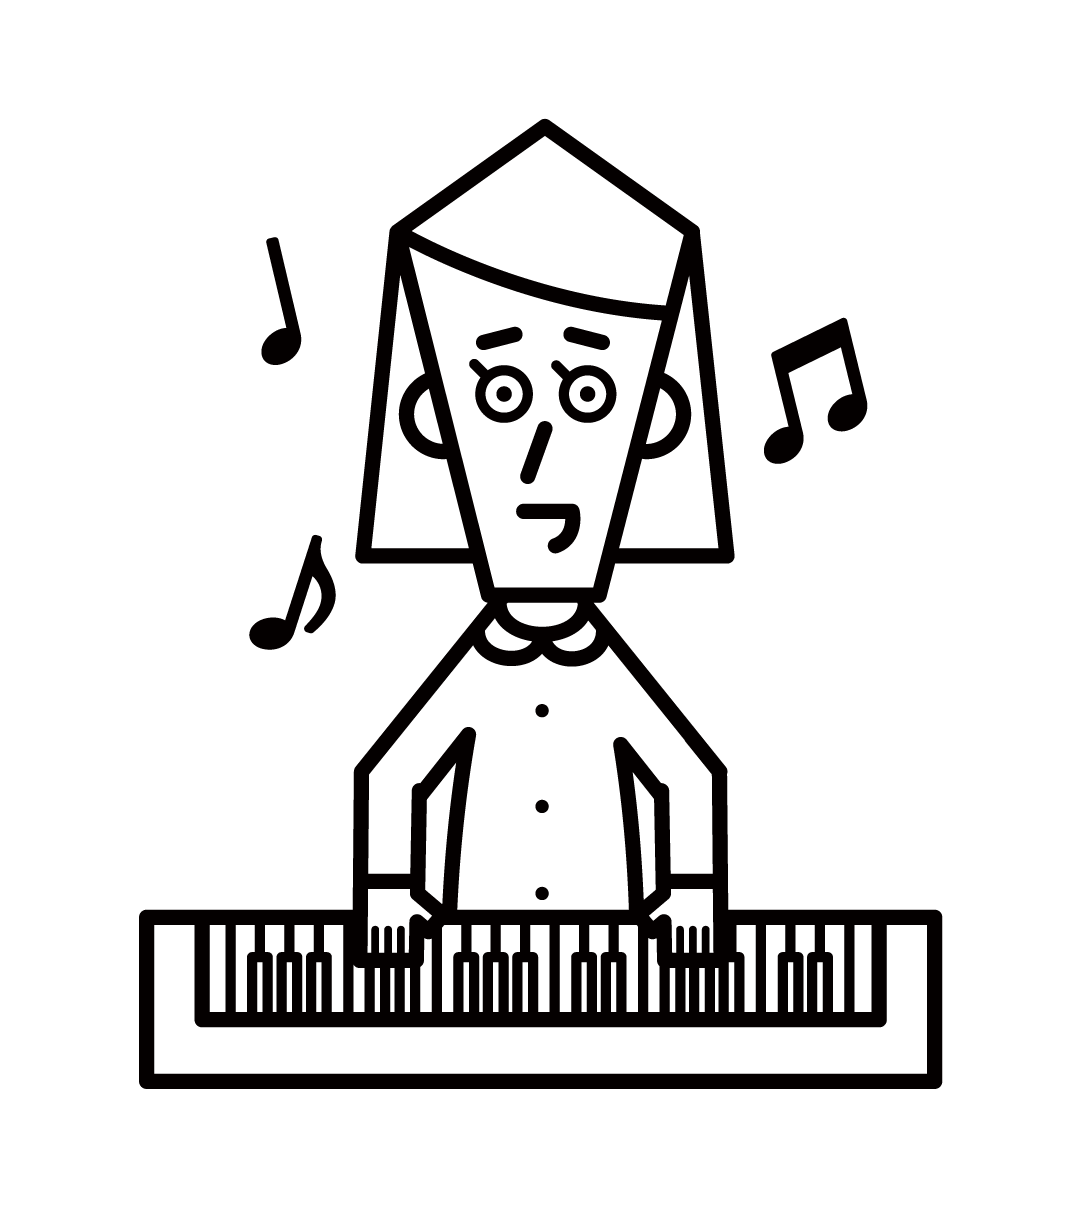 Illustration of a woman playing a keyboard synthesizer